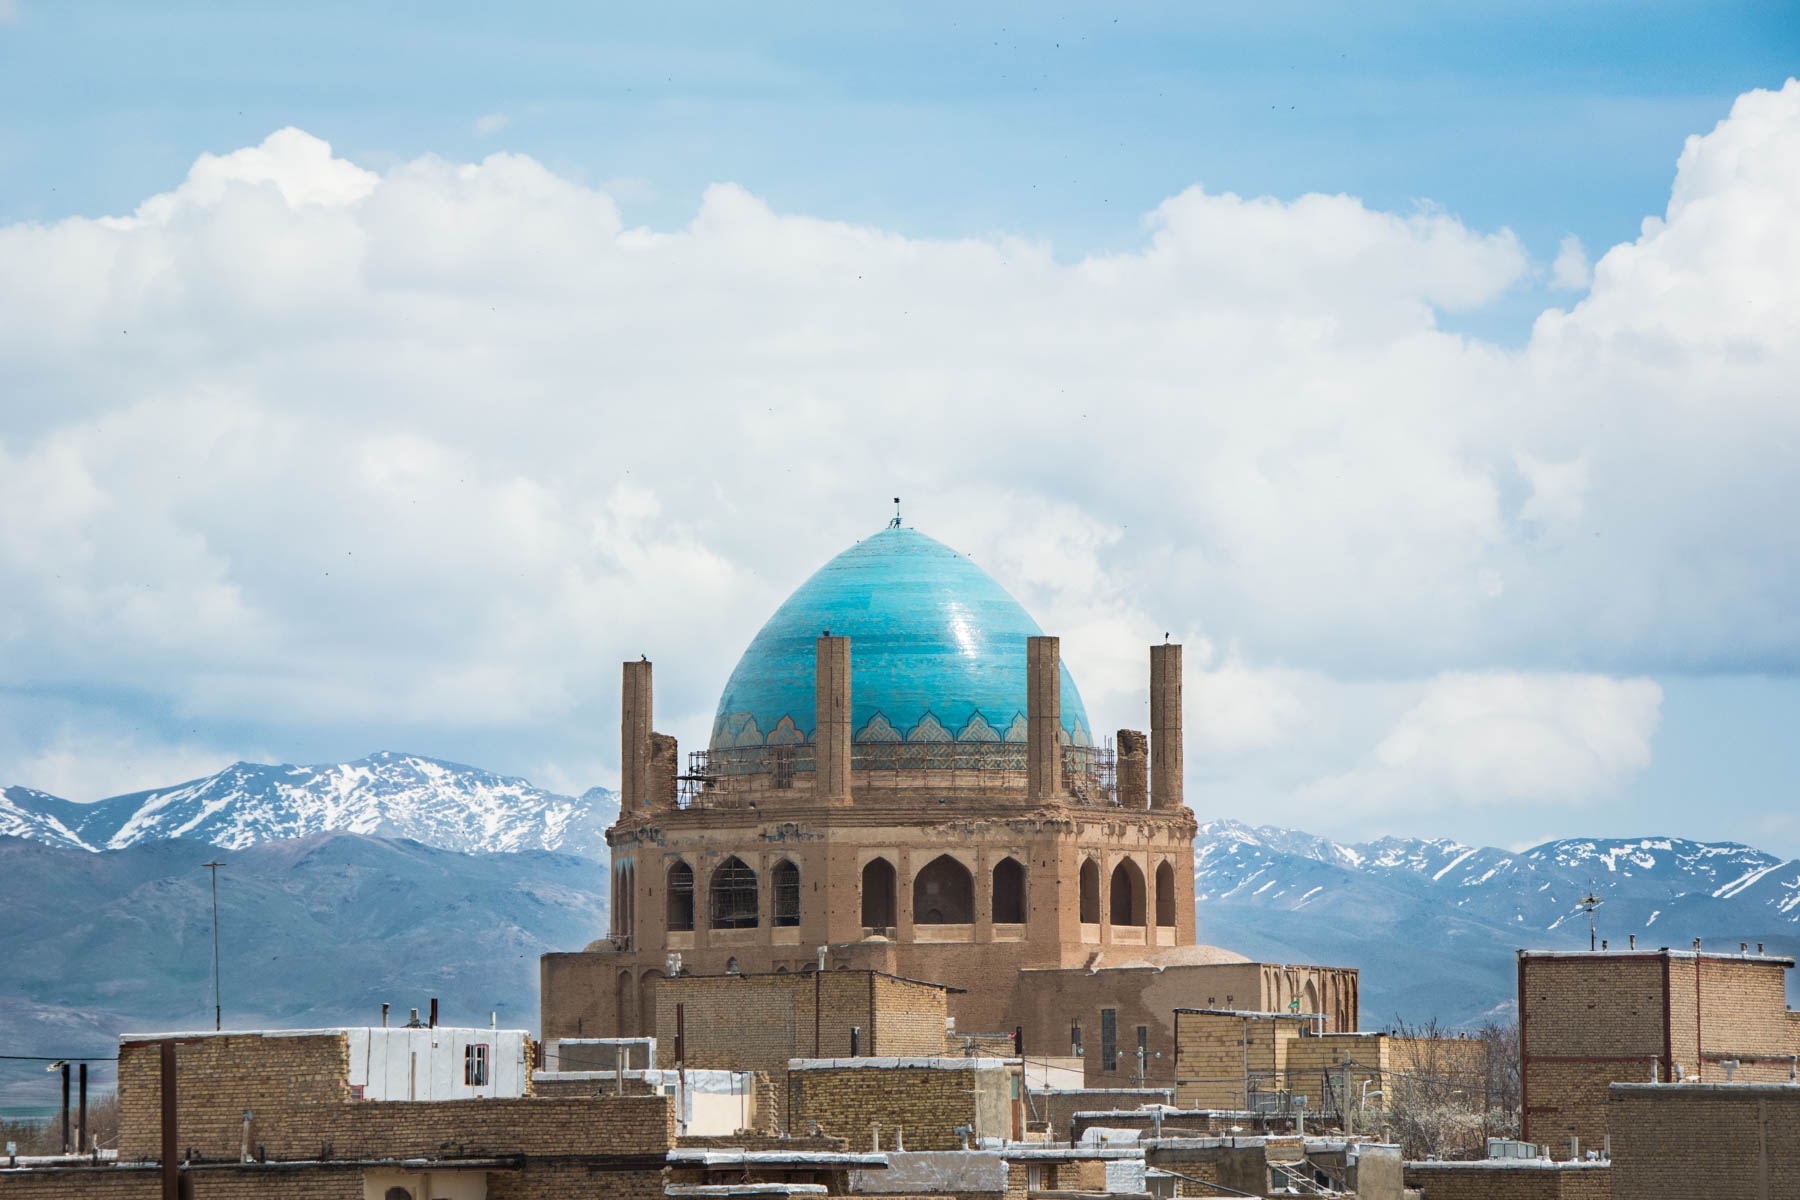 Soltaniyeh dome, a famous mausoleum in Iran